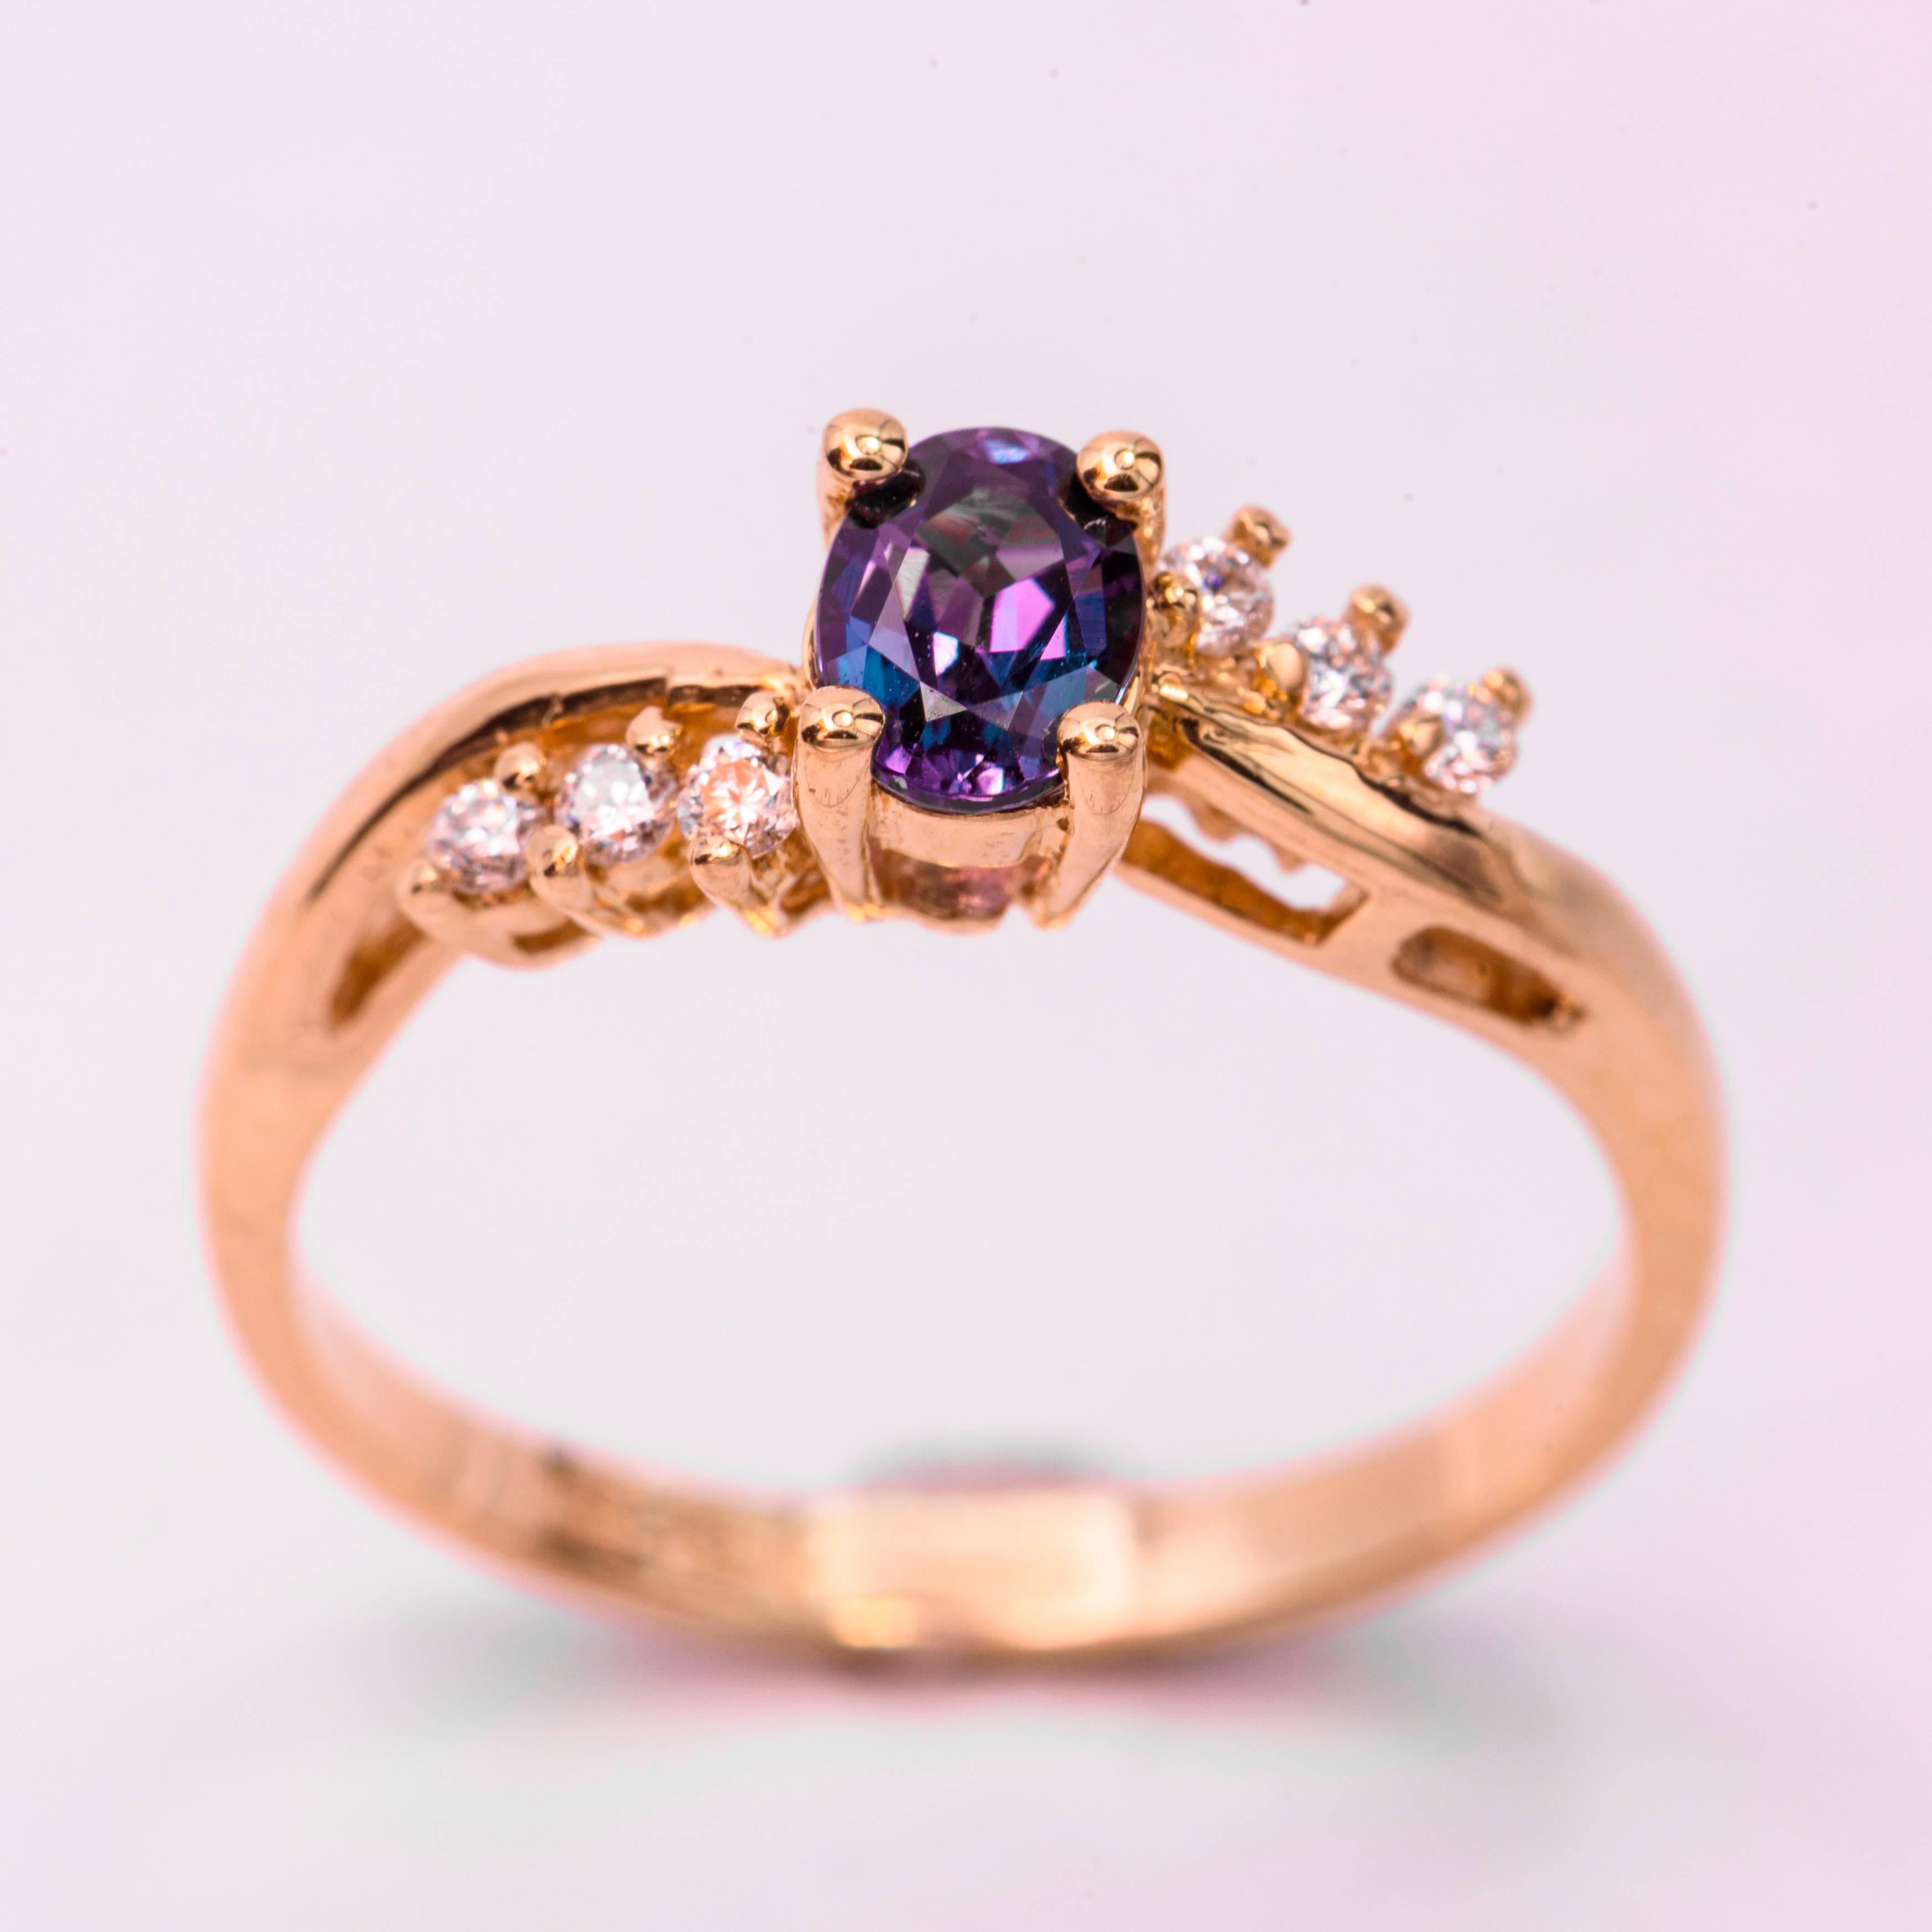 18 Karat  Yellow Gold Color-Changing Alexandrite Ring with CC Certificate 
Oval Alexandrite 0.44 Ct.
Diamonds 0.09 cts.